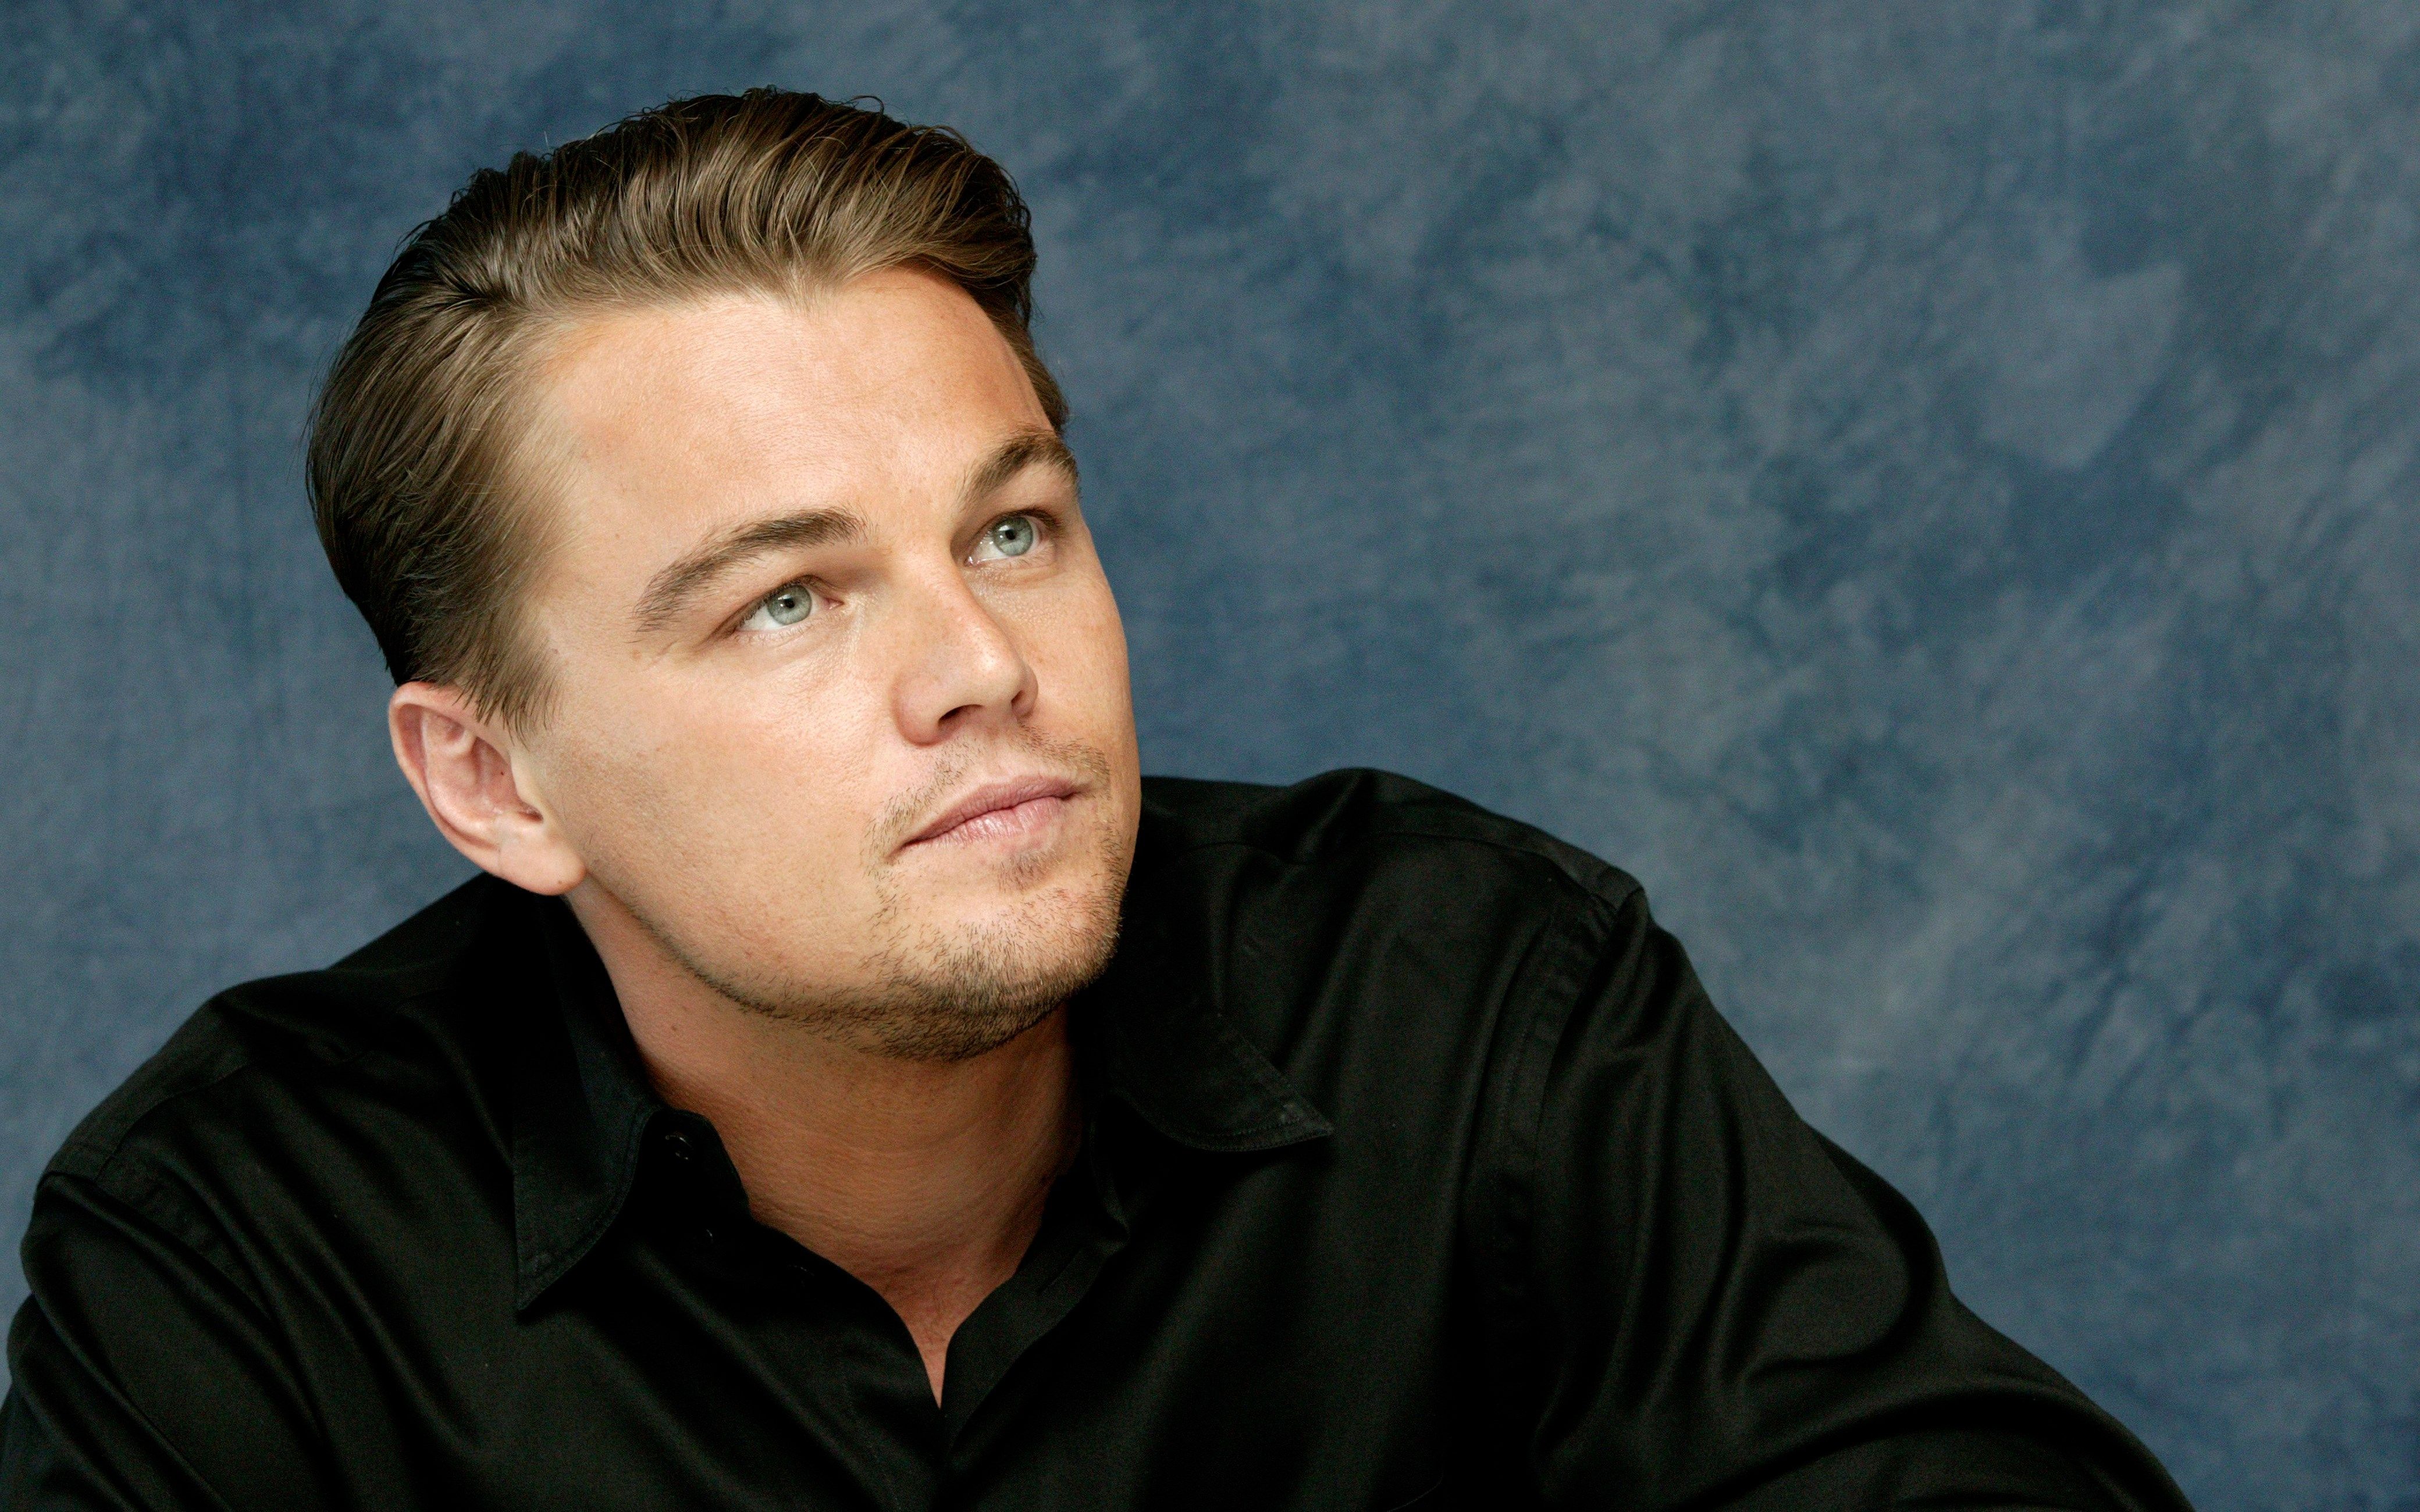 Leonardo Dicaprio Hd Celebrities 4k Wallpapers Images Backgrounds Hot Sex Picture 